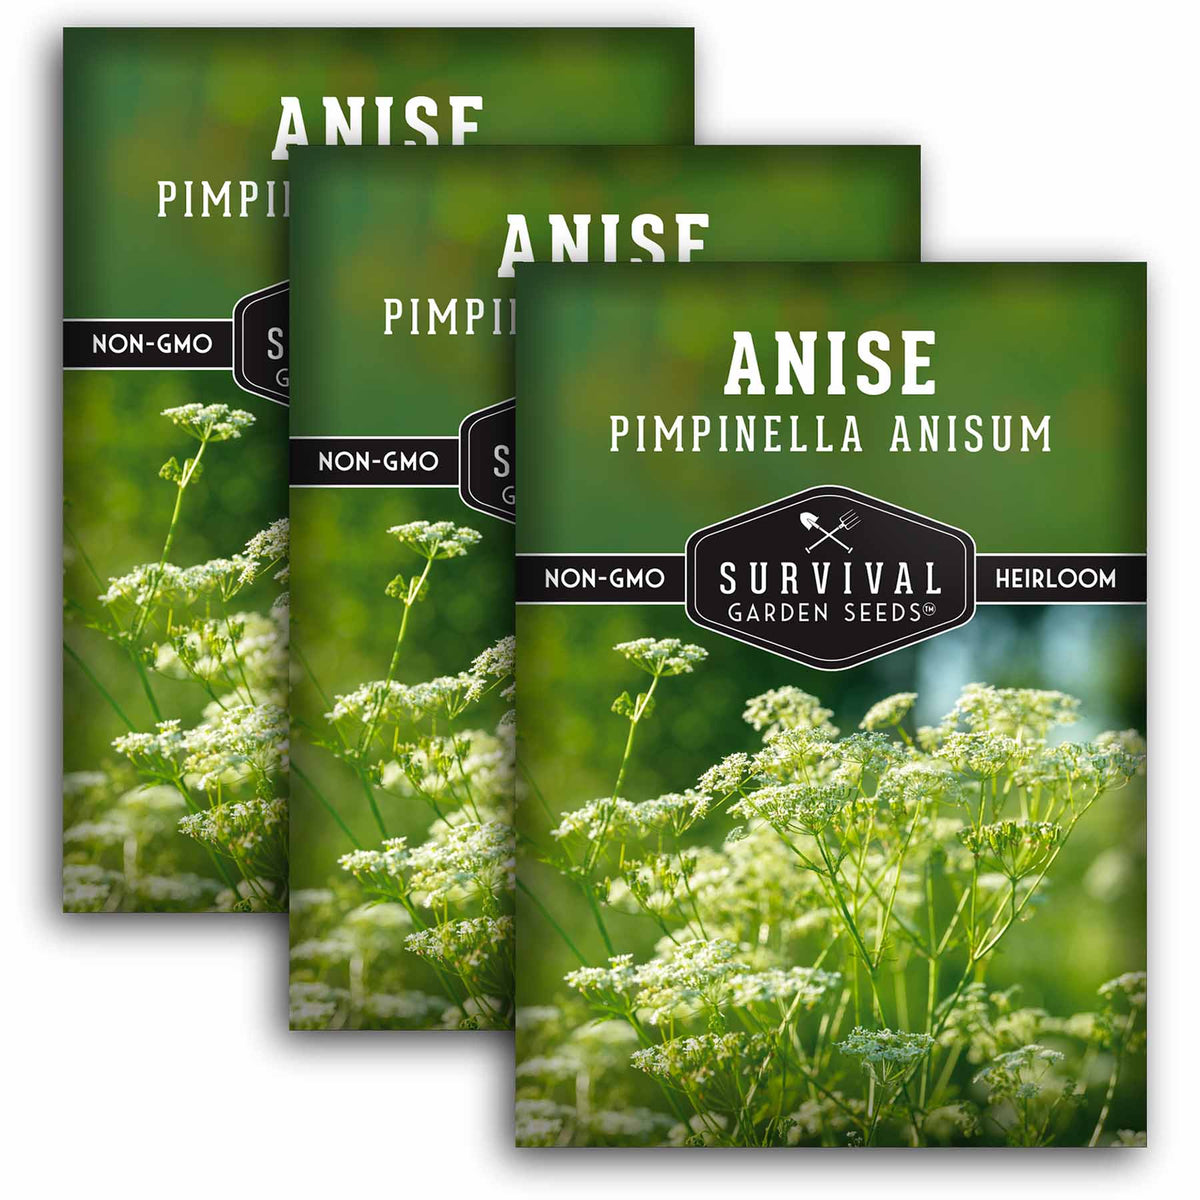 3 packets of Anise seeds